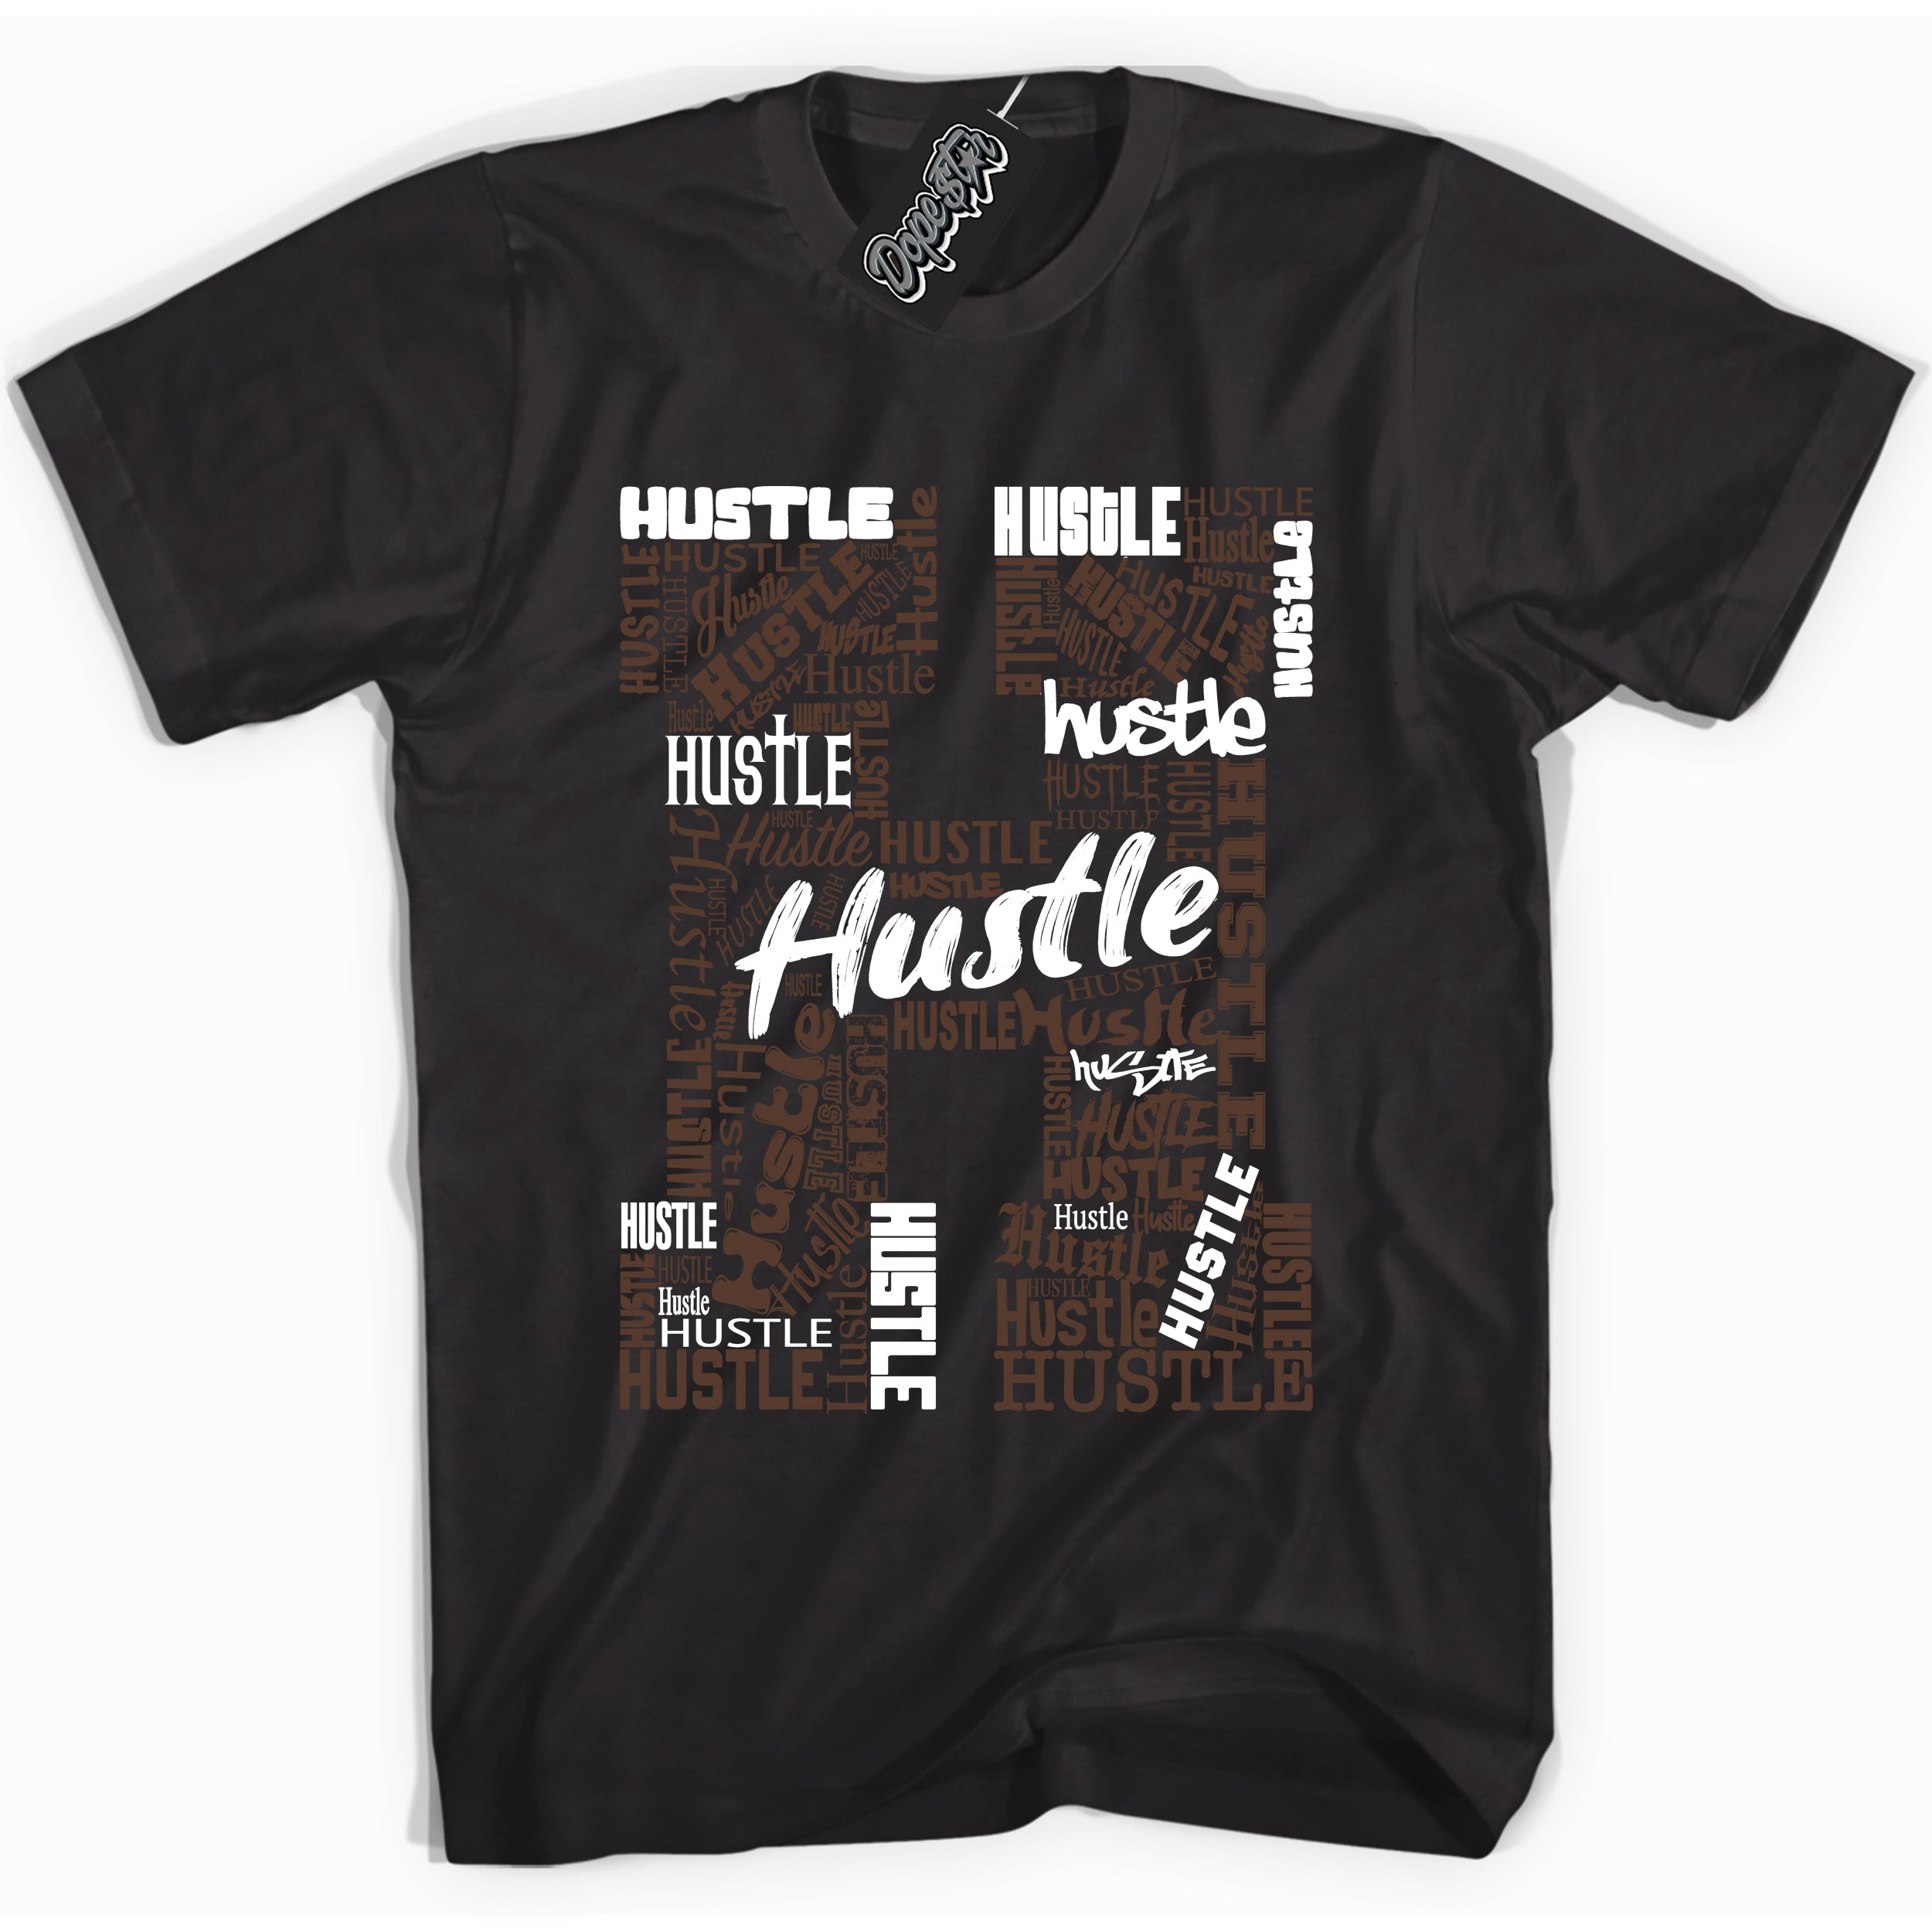 Cool Black graphic tee with “ Hustle H ” design, that perfectly matches Palomino 1s sneakers 